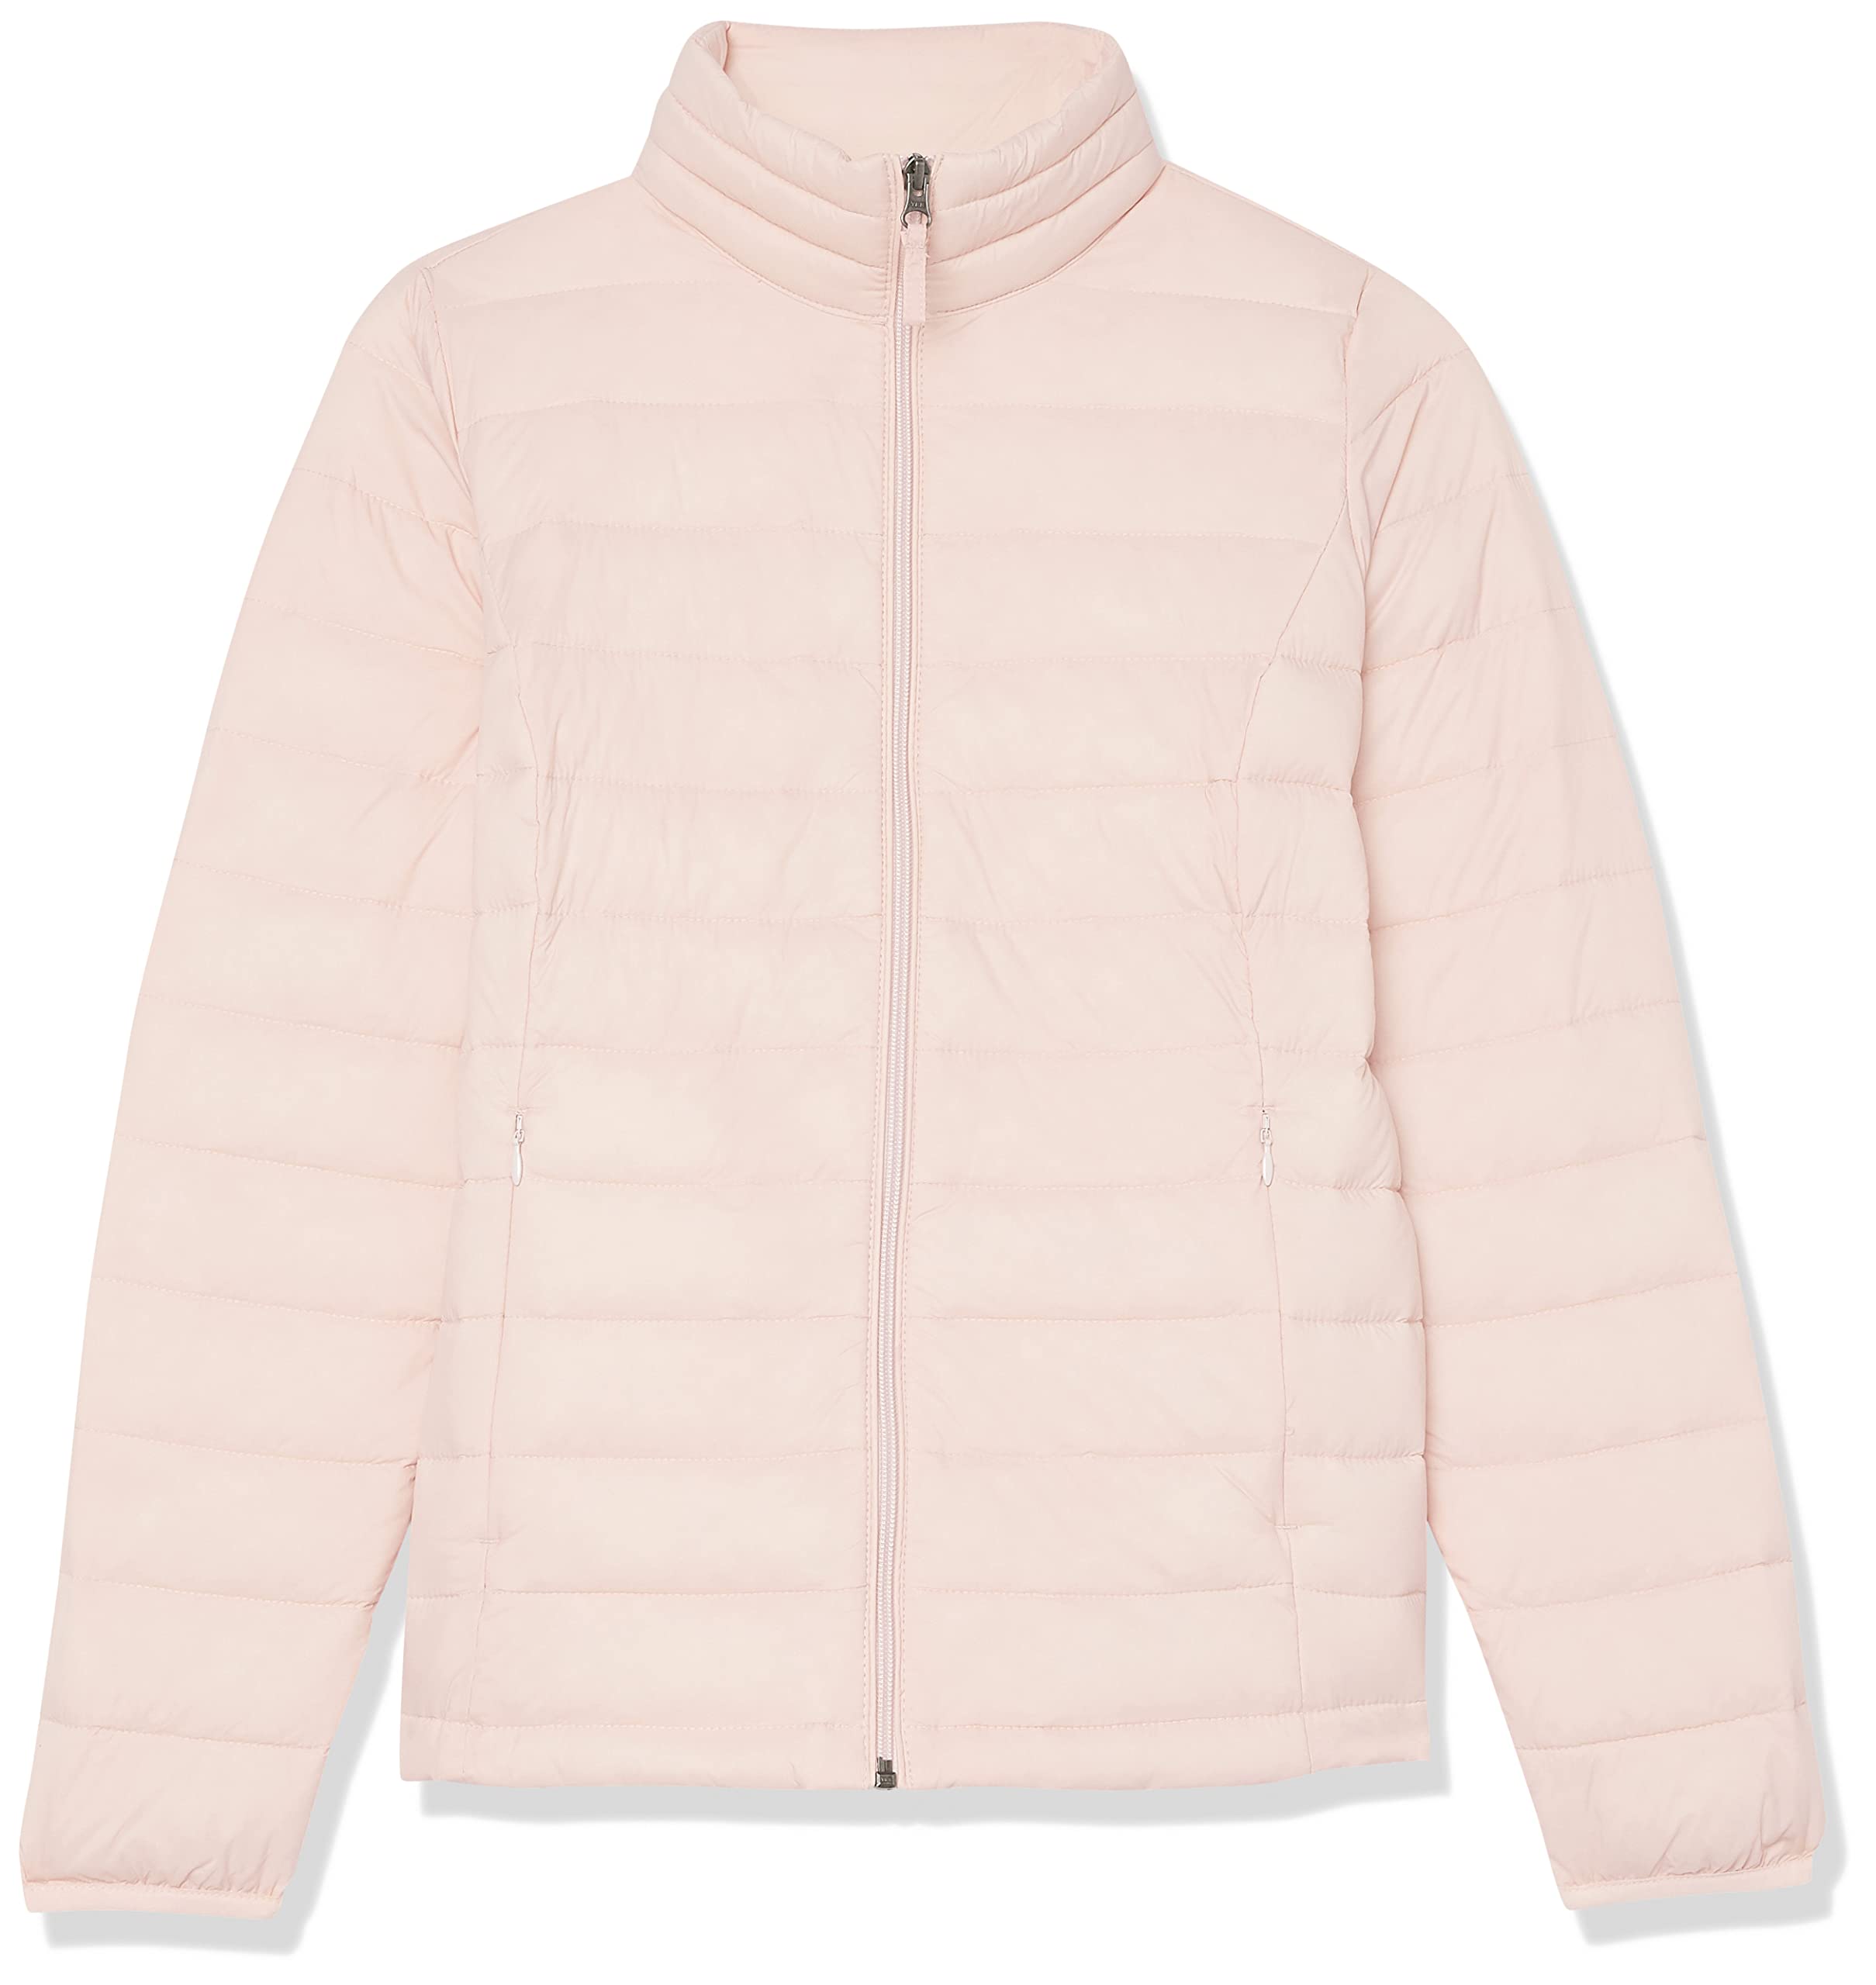 Amazon Essentials Women's Lightweight Long-Sleeve Water-Resistant Packable Puffer Jacket (Light Pink) XX-Large $11.70 + Free Shipping w/ Prime or on $35+